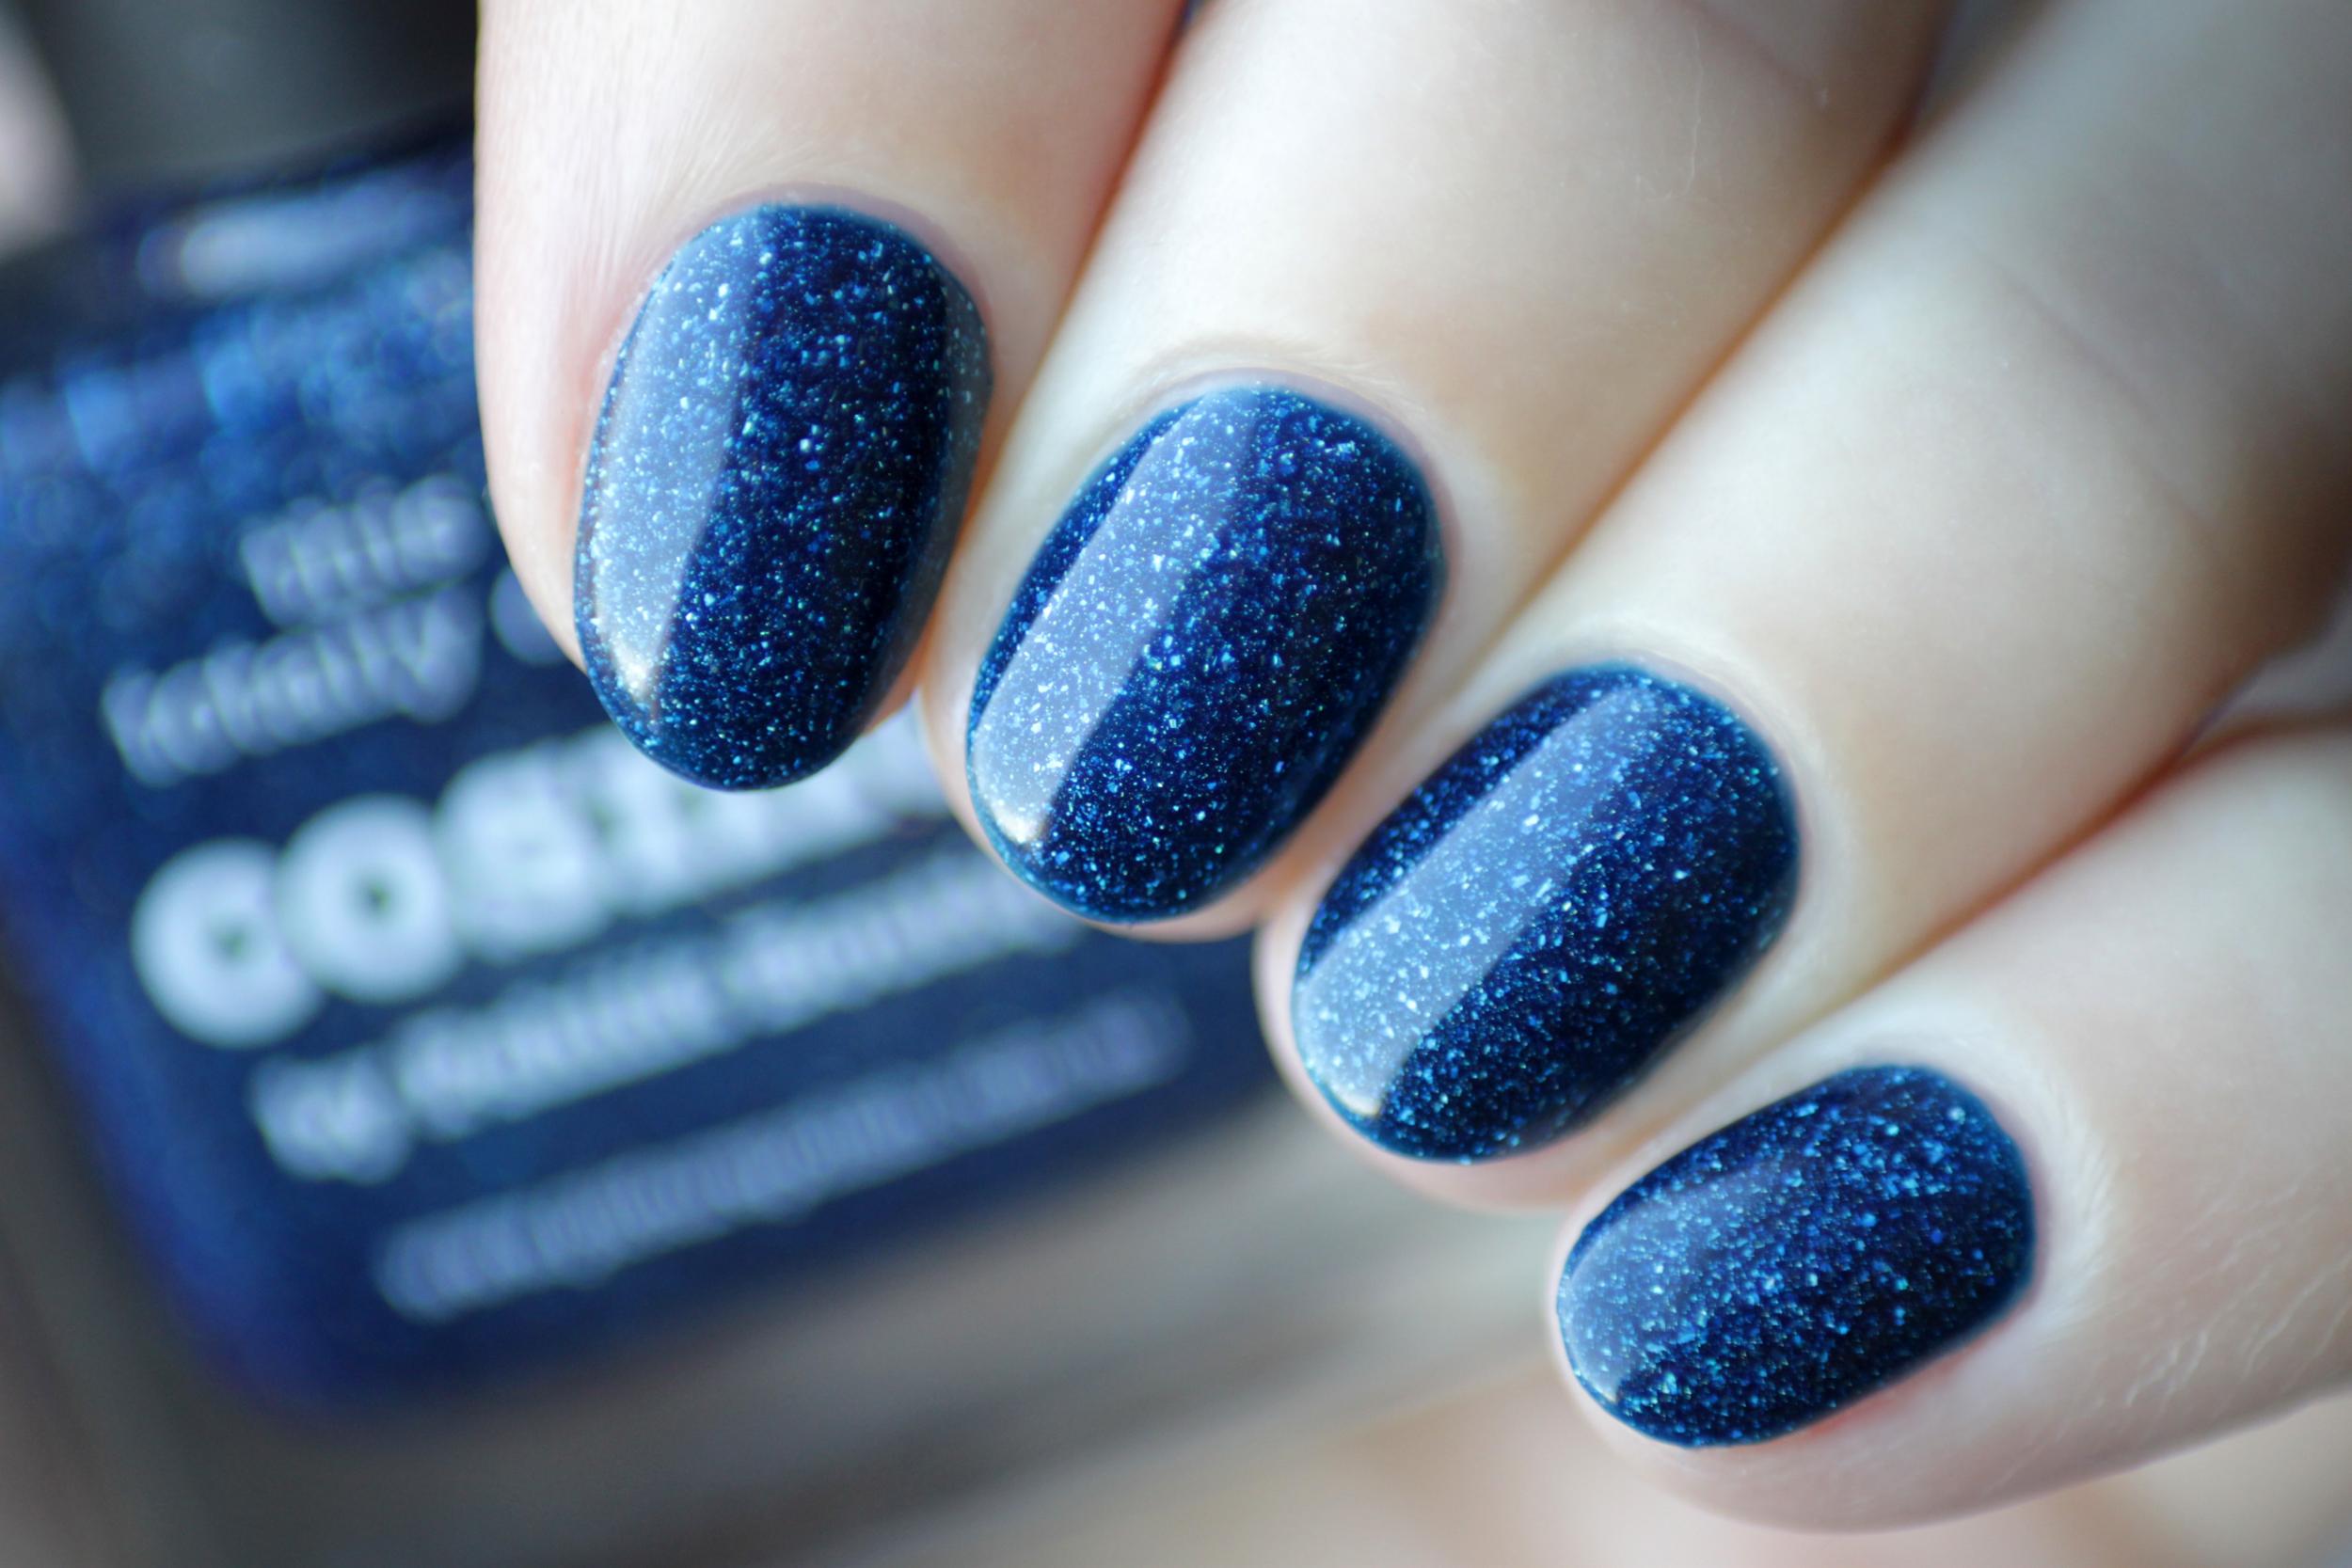 9. "Classic Winter Nail Polish Colors That Never Go Out of Style" - wide 7